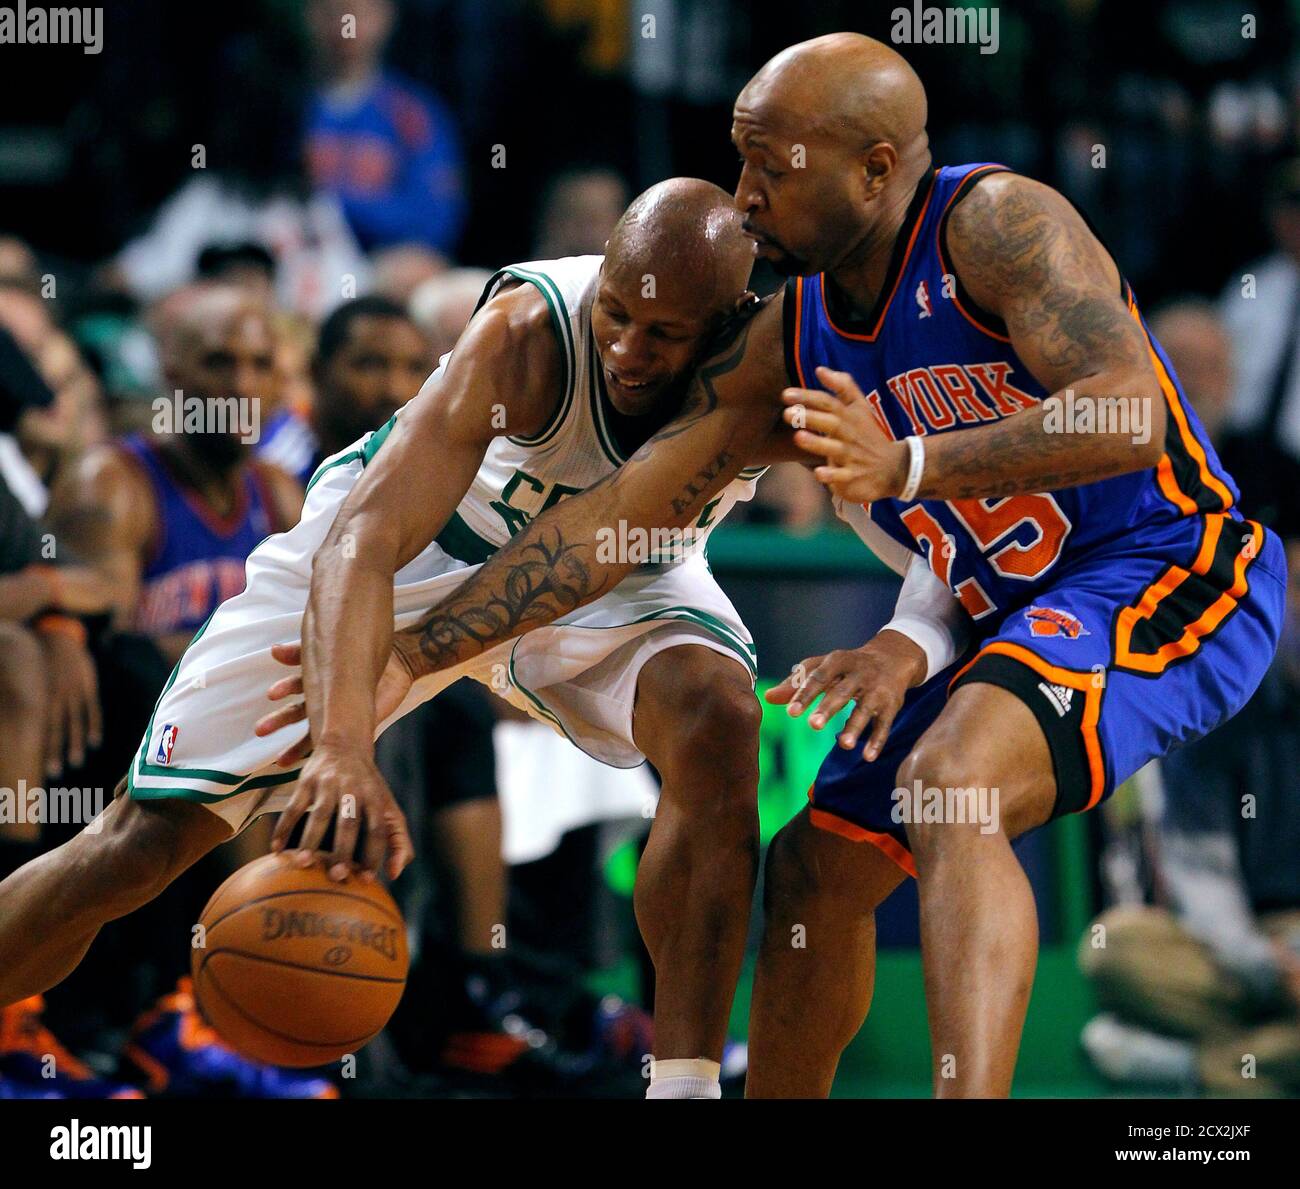 New York Knicks guard Anthony Carter (R) knocks the ball away from Boston  Celtics guard Ray Allen during the second half of Game 1 of their NBA  Eastern Conference playoff series in